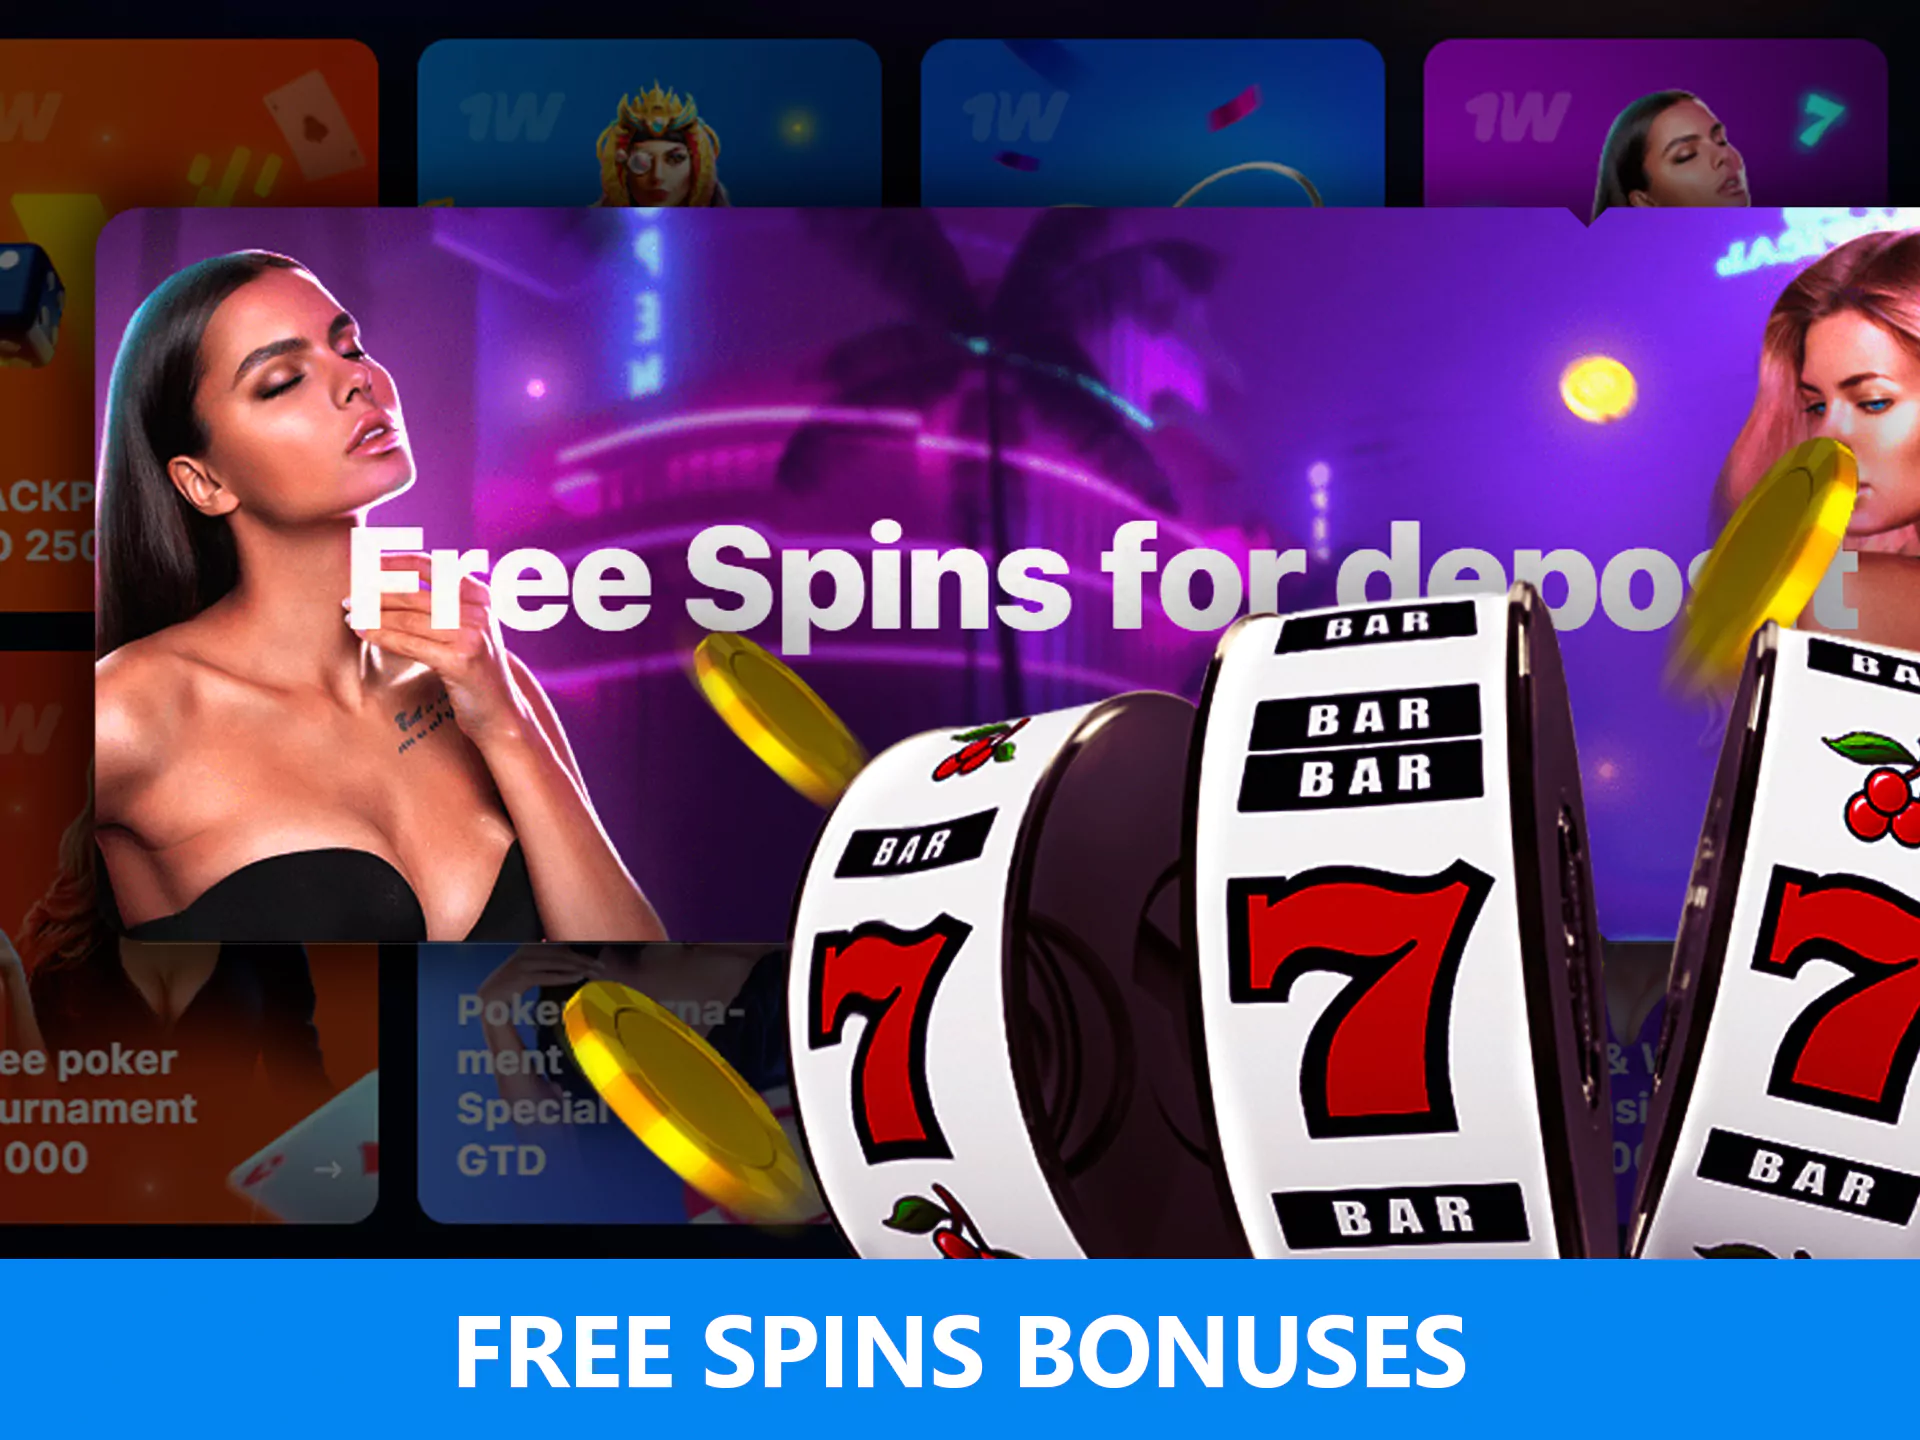 As a part of a deposit bonus, you can get free spins.